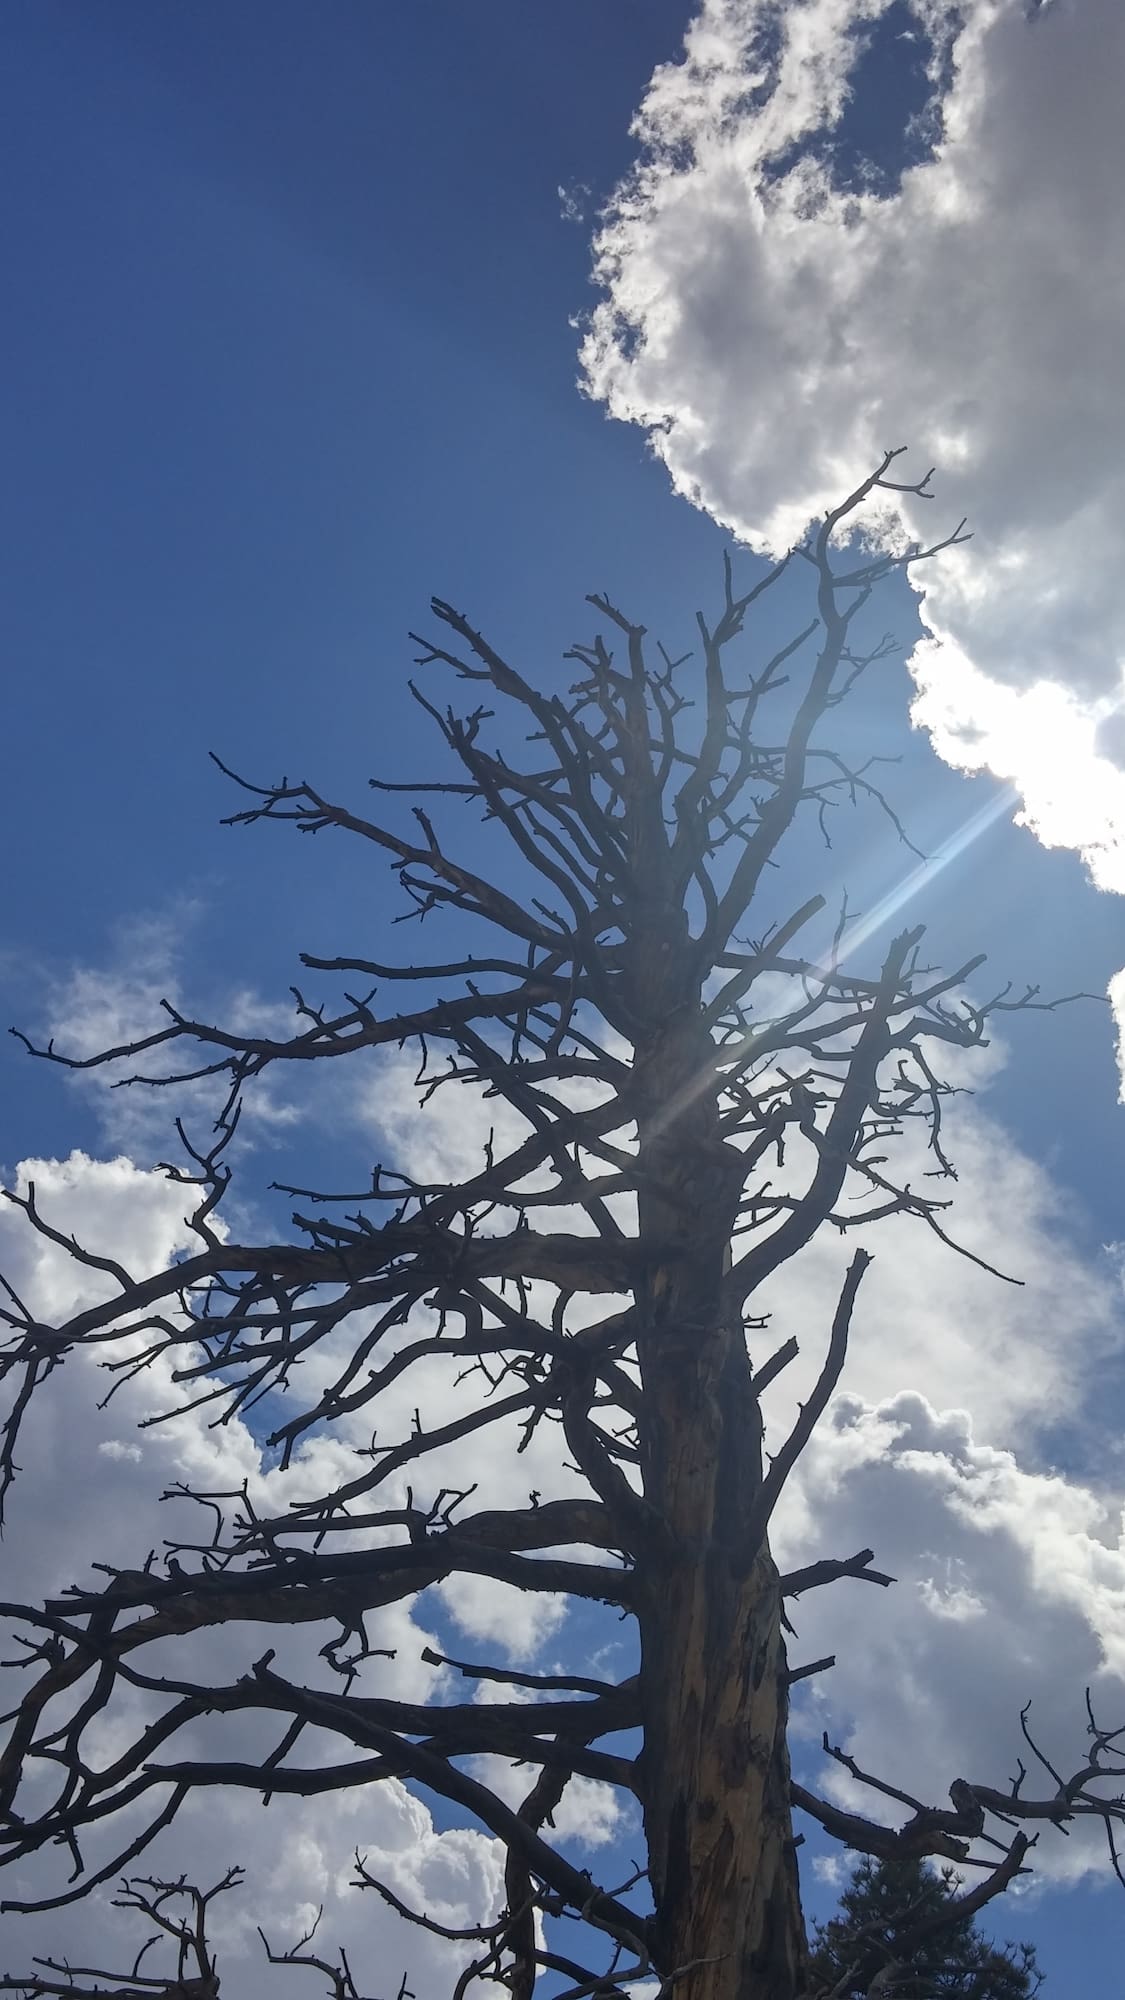 SUU Past: Reaching by SUU Alumnus Amy Toronto Weir "This old Cedar tree, found along one of the trails, was always reaching for the sun, just as my education helped me reach for higher things." 4